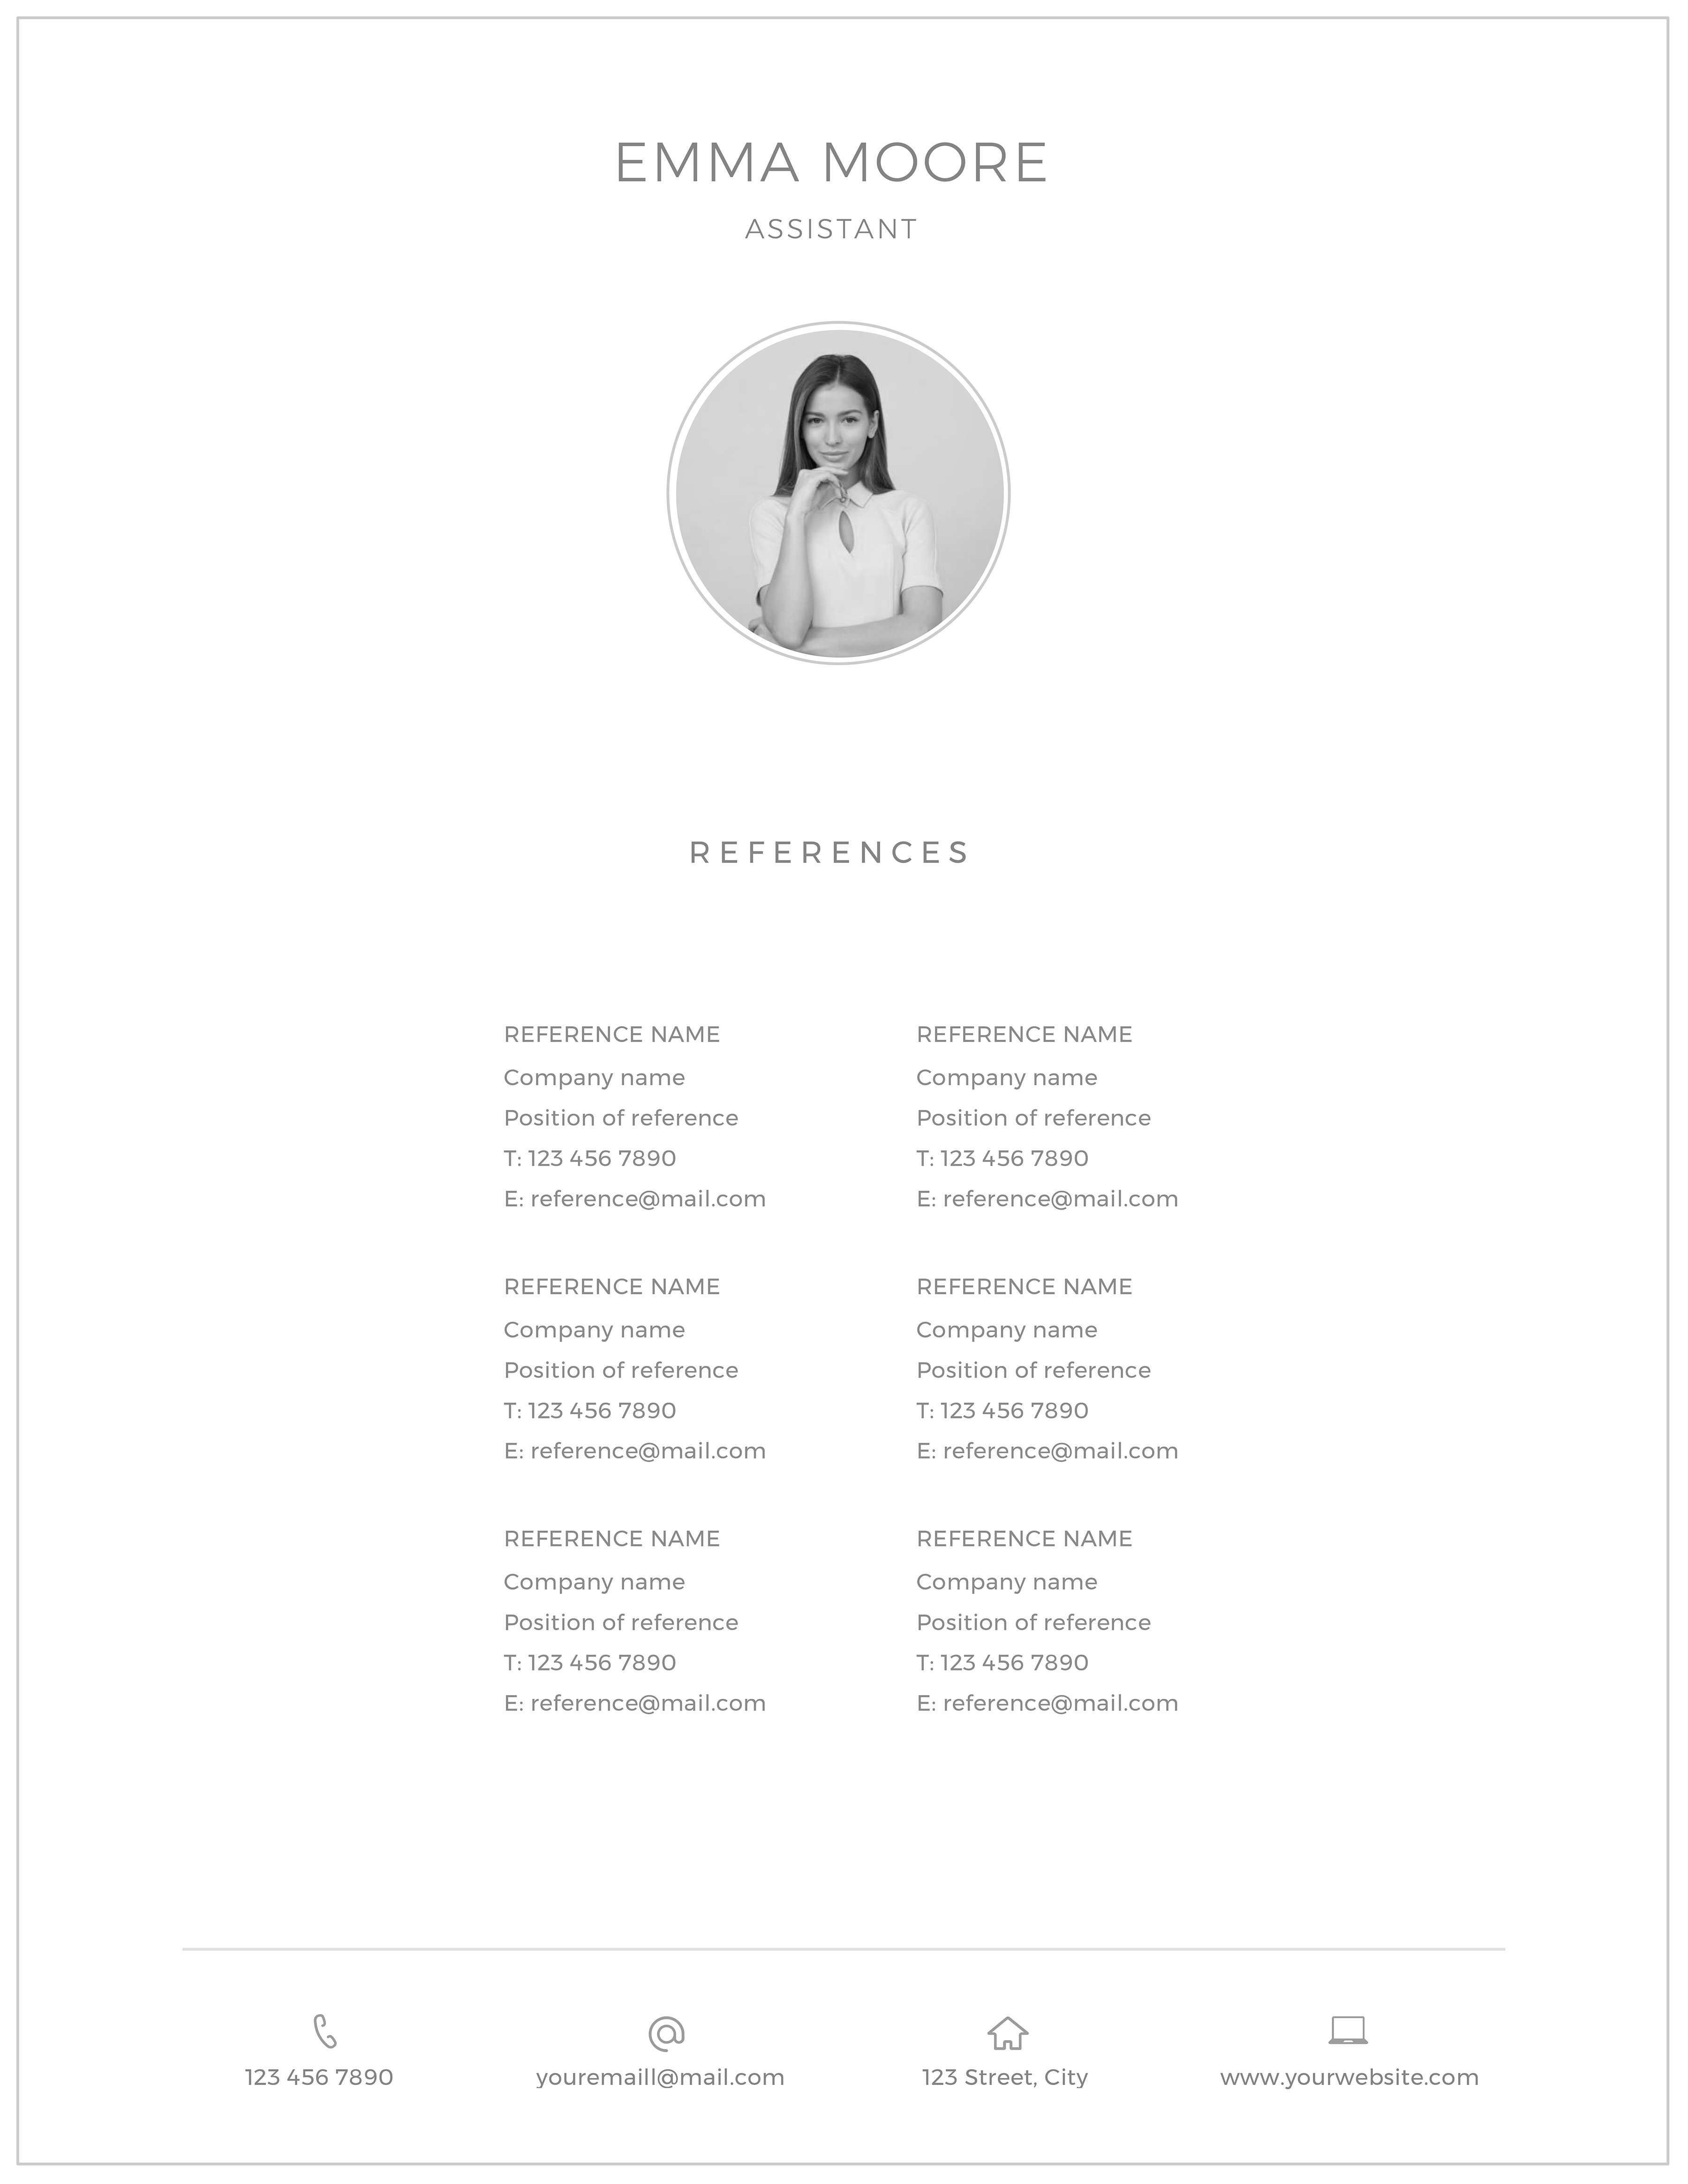 White resume with a black and white photo.